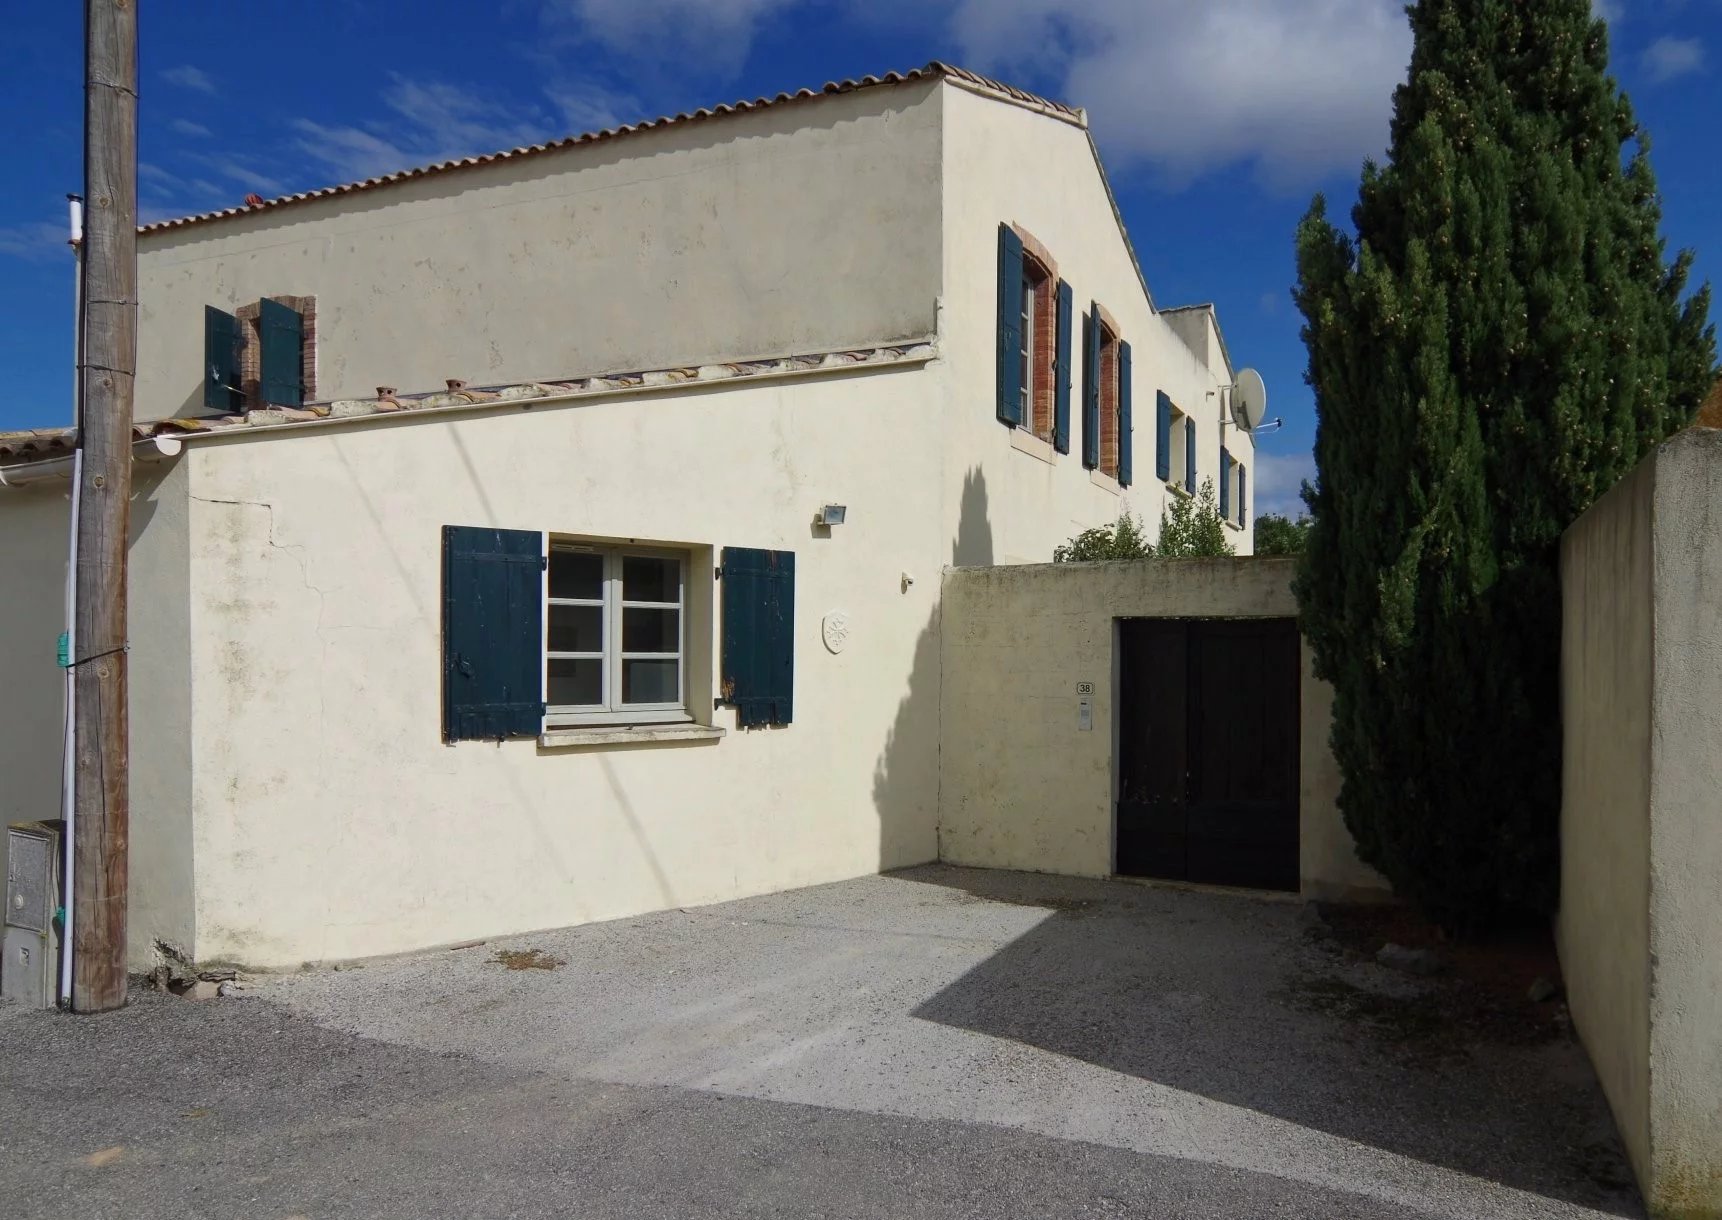 5 bed house in the Aude with pool, gardens - close to the Canal du Midi